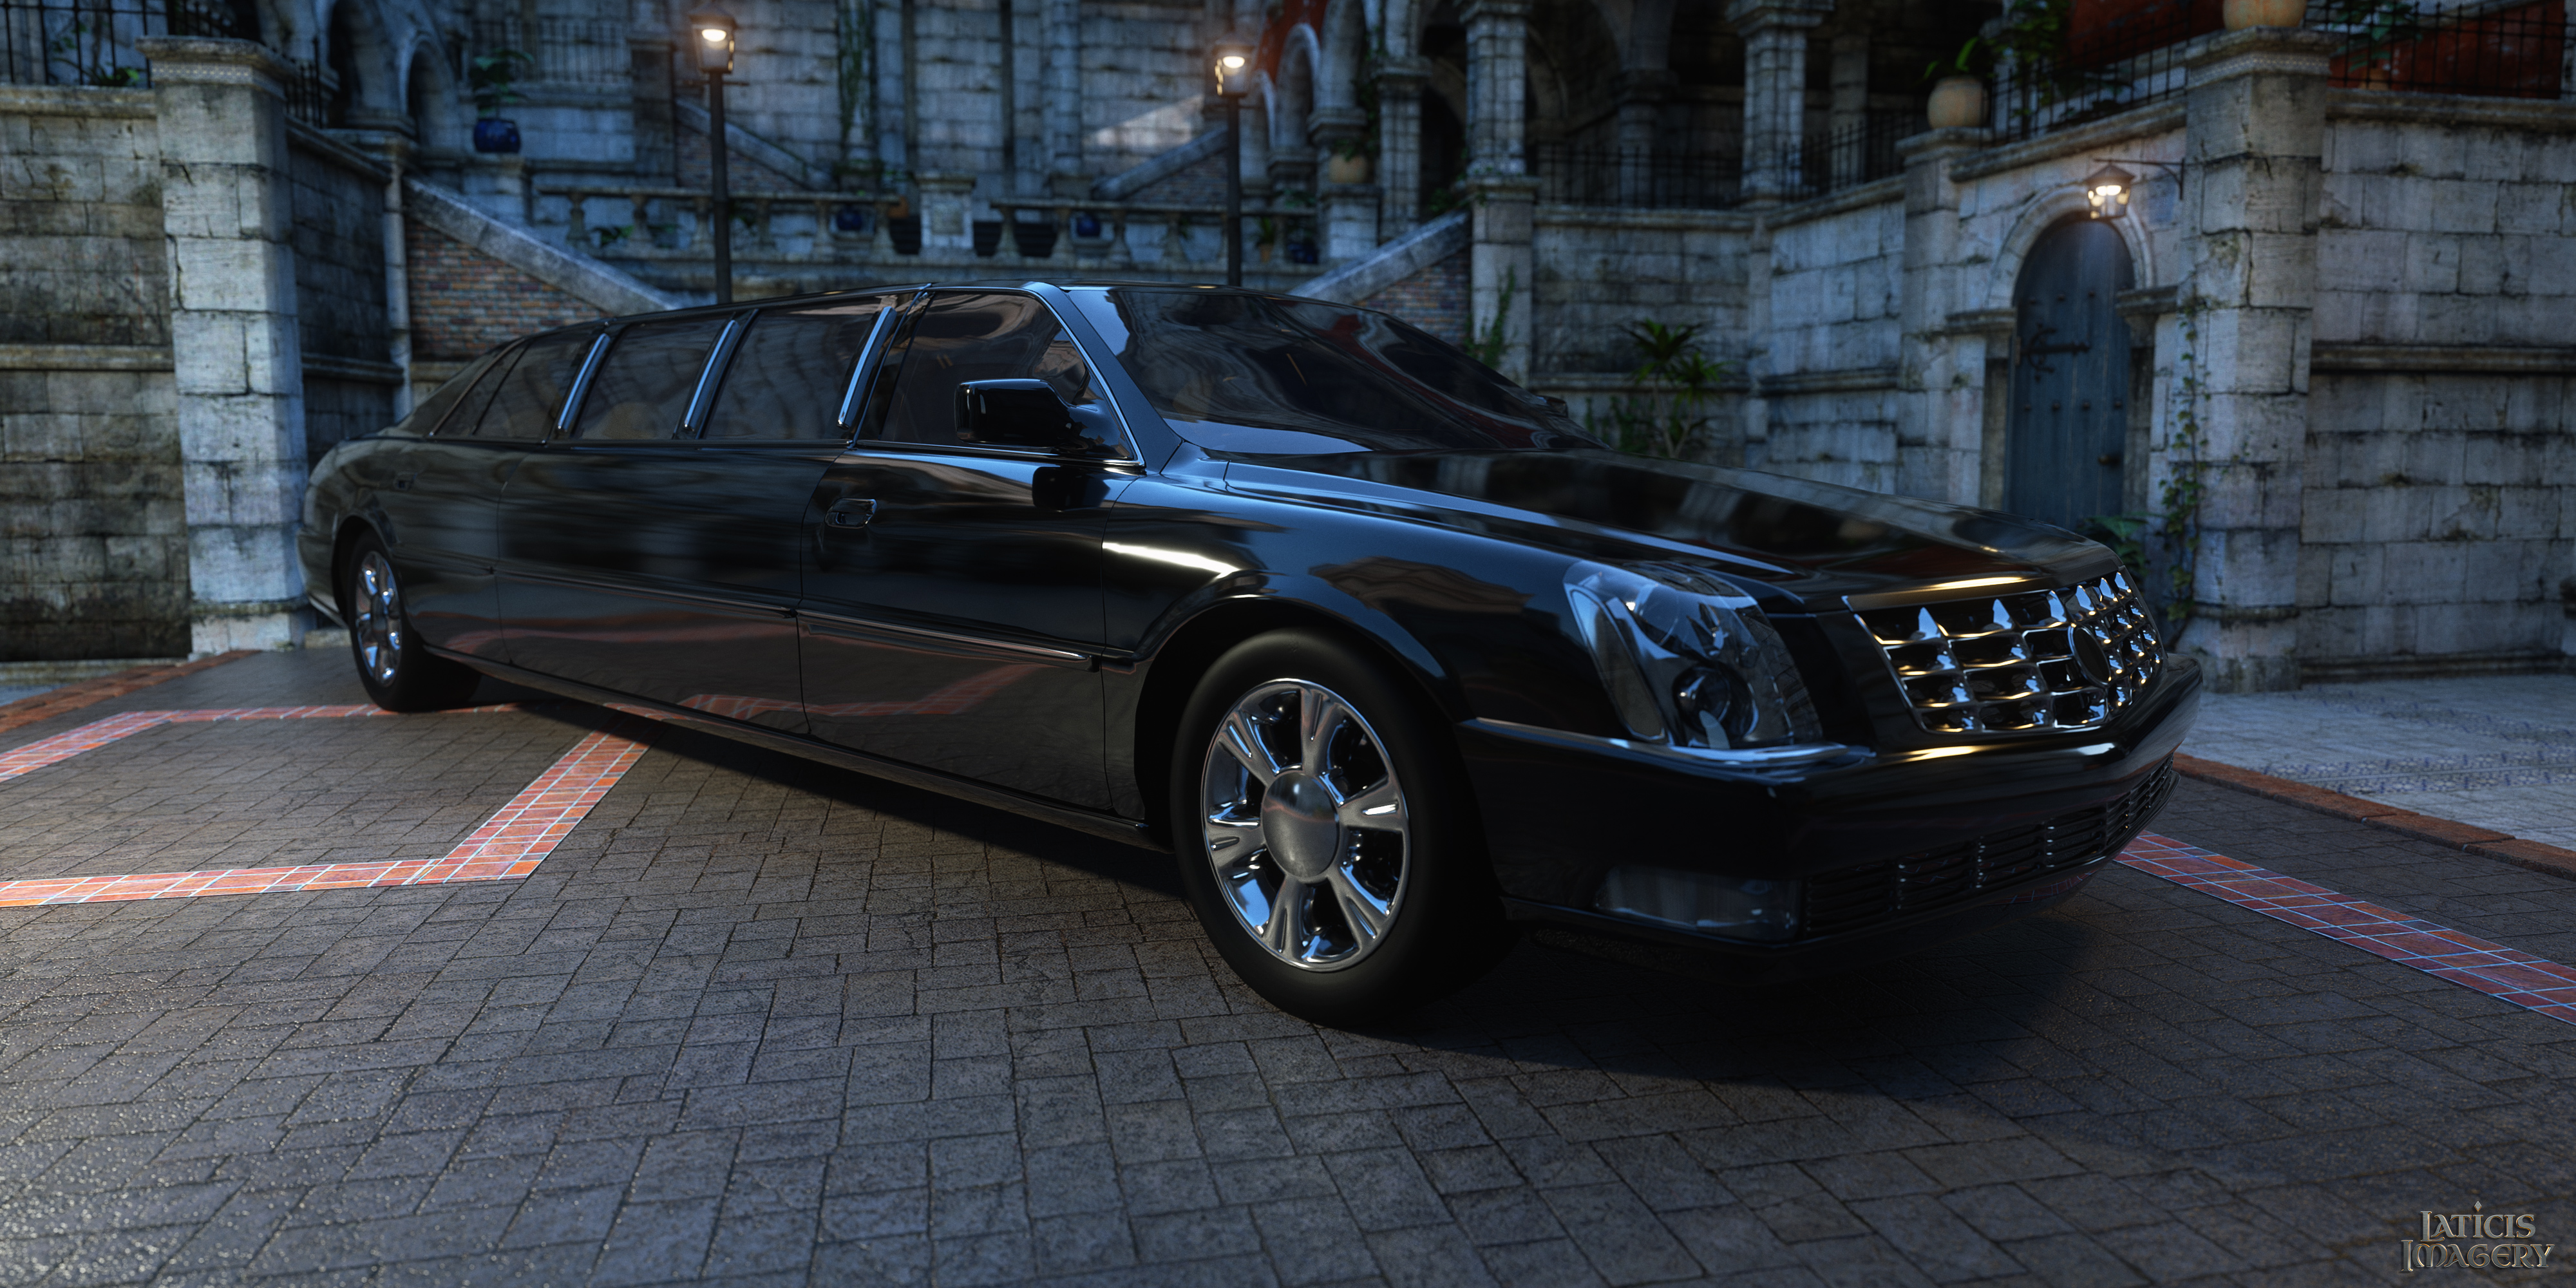 Hd Wallpapers Of Limousine Car